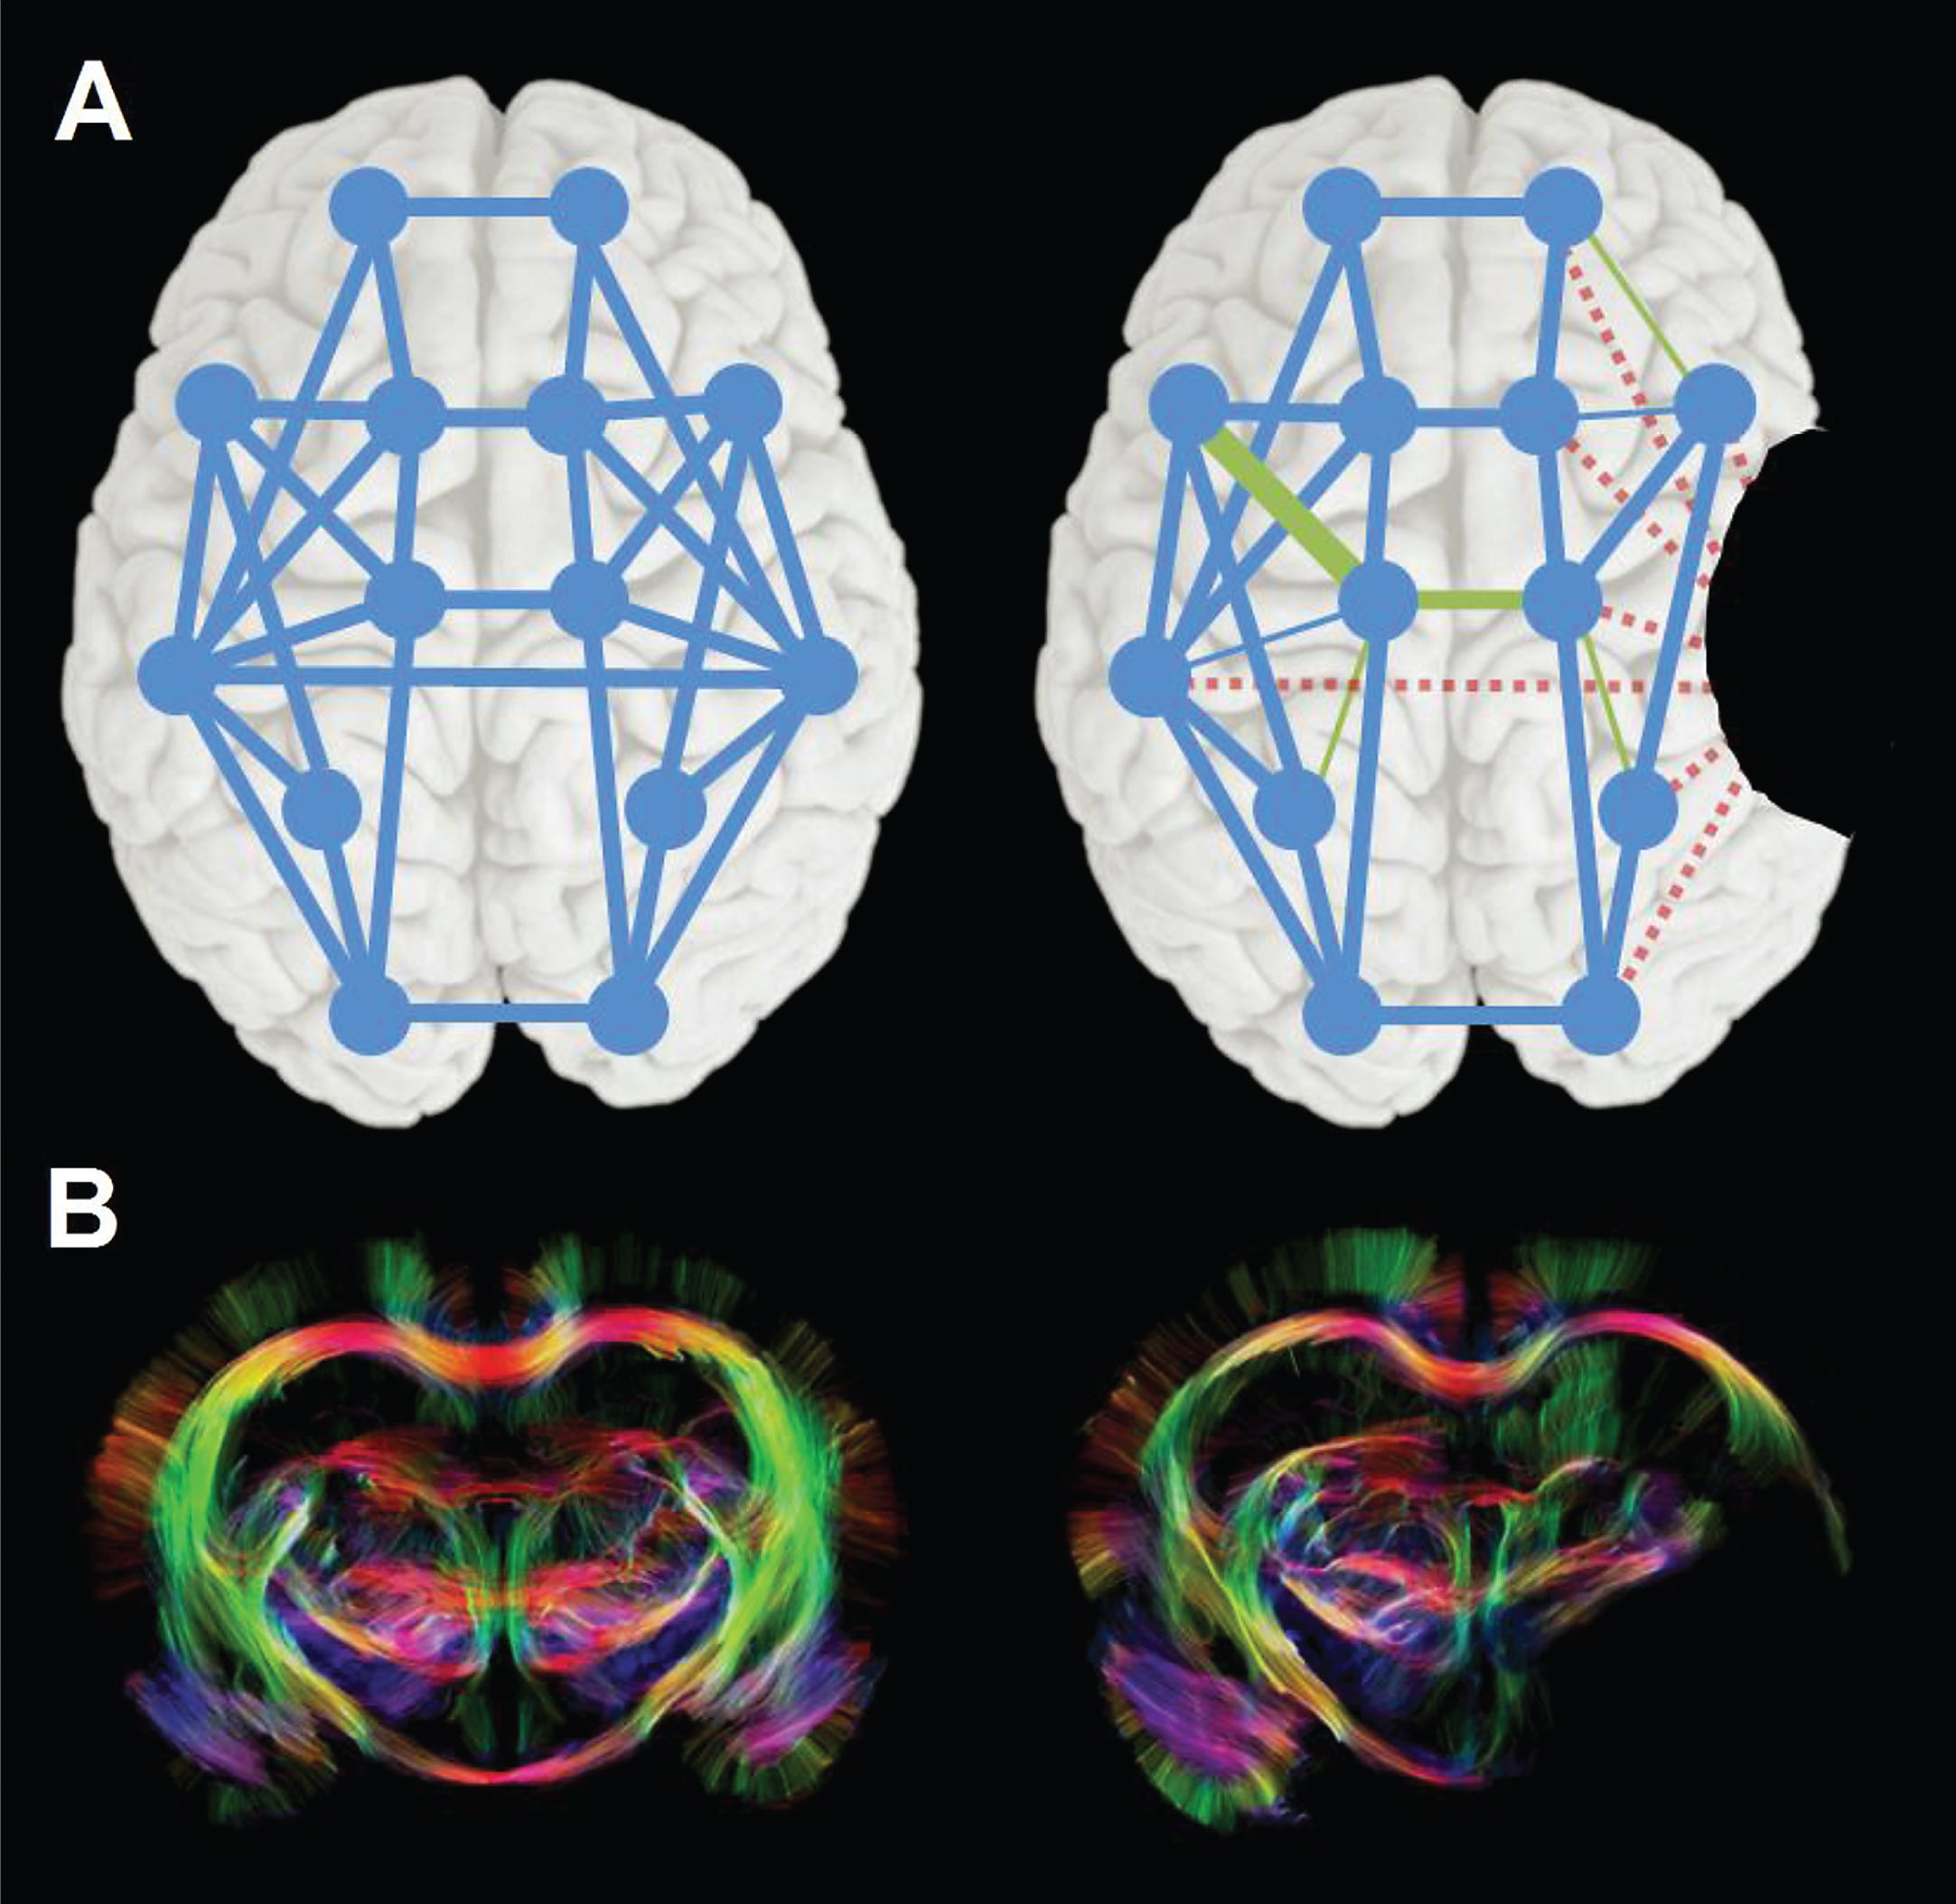 Changes in neural network connectivity after stroke. (A) Schematic representation of a neural network in human brain before (left), with nodes and edges in blue, and after stroke (right), illustrating global disconnection (red dotted edges) and reorganization (green edges) as a result of a focal stroke lesion (black area). (B) Diffusion tensor imaging-based fiber tractography maps of control (left) and 10-weeks post-stroke rat brain (right), showing altered fiber pathway patterns in perilesional white matter chronically after stroke. Stroke was induced by 90-min intraluminal occlusion of the right middle cerebral artery in adult male Sprague Dawley rats. High angular (120 directions) and spatial resolution (0.2 mm isotropic voxels) diffusion-weighted MRI data were acquired post mortem on a 9.4 T animal MRI scanner (total scan time: 26 h). MrTrix3® software (http://www.mrtrix.org/) was used for diffusion-based tractography. Courtesy of Michel Sinke and Willem Otte.